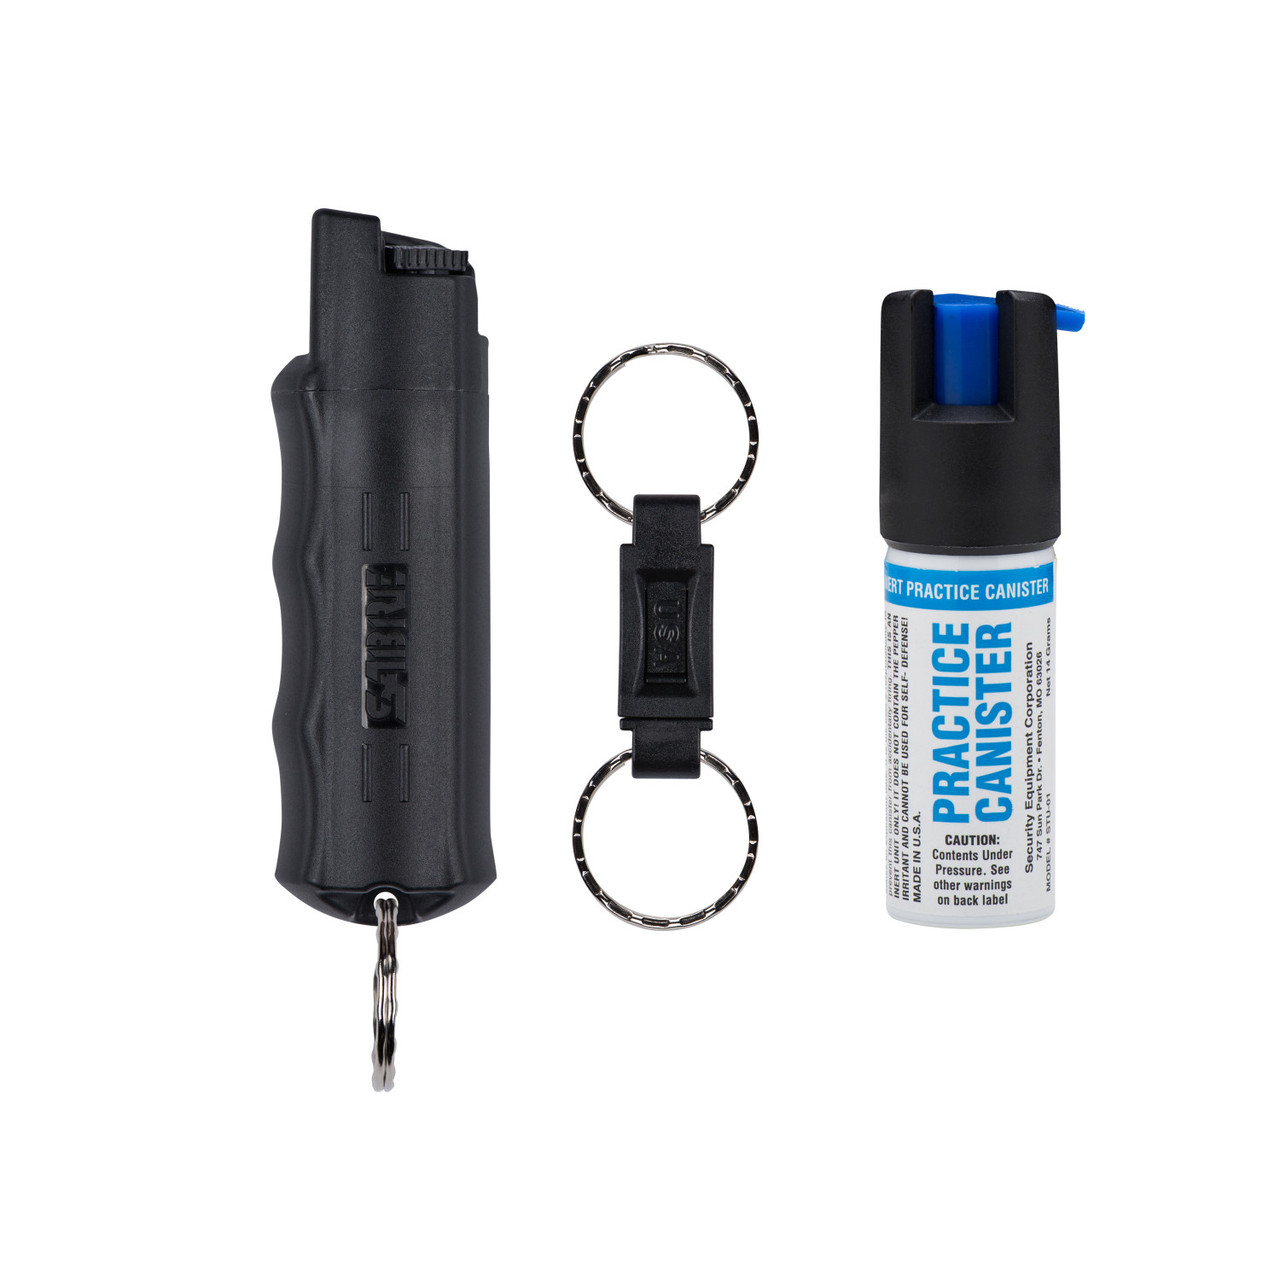 SABRE Defense Spray New User Kit with Water Practice Spray Canister